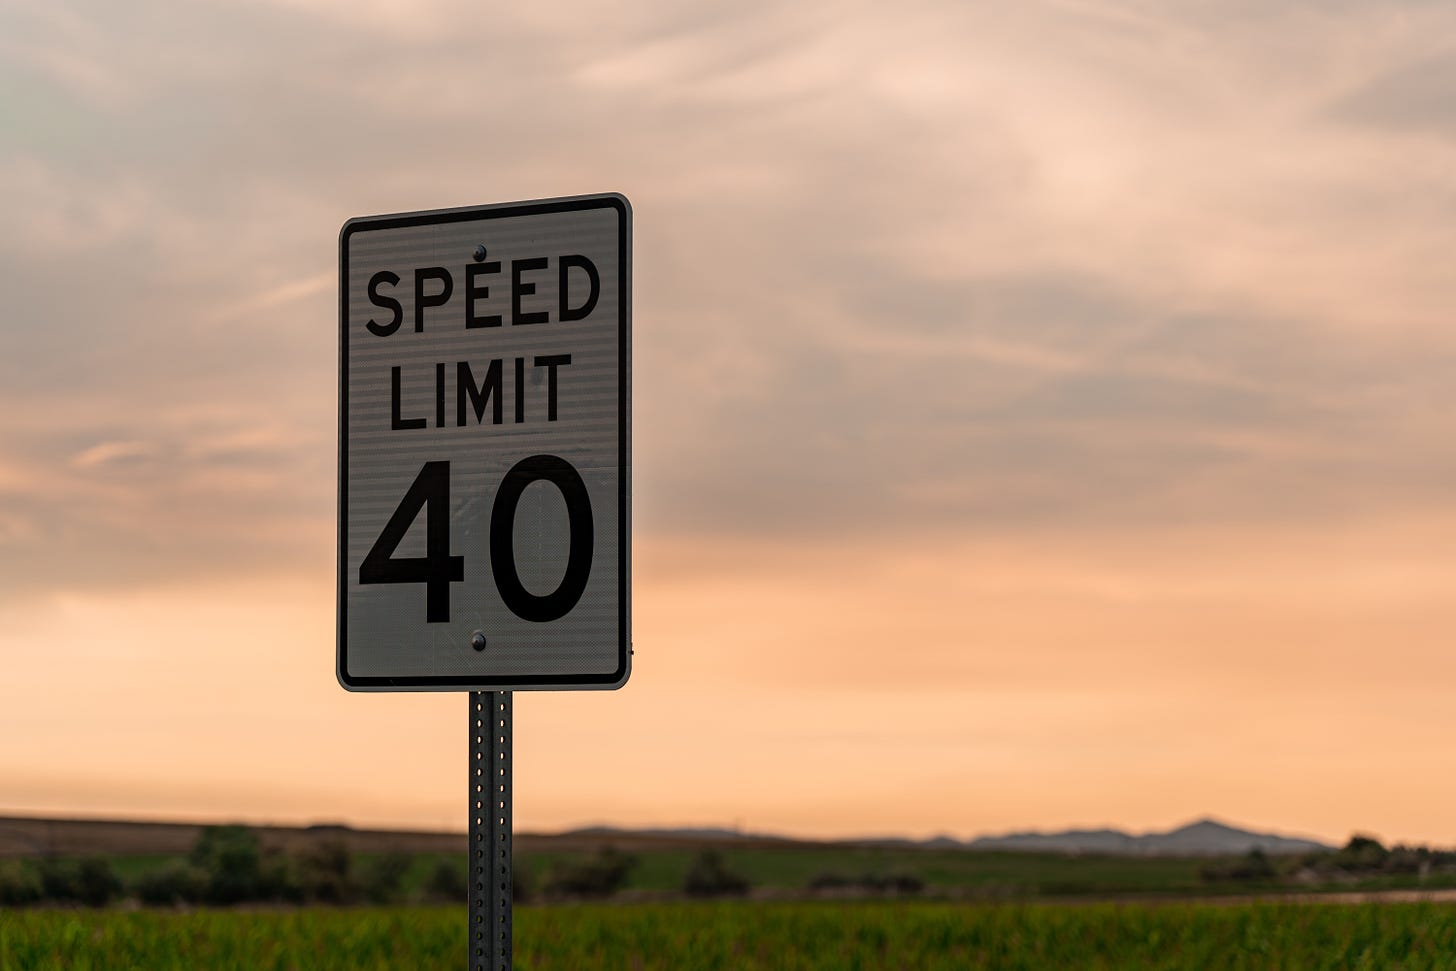 speed limit 40 sign with sunset background